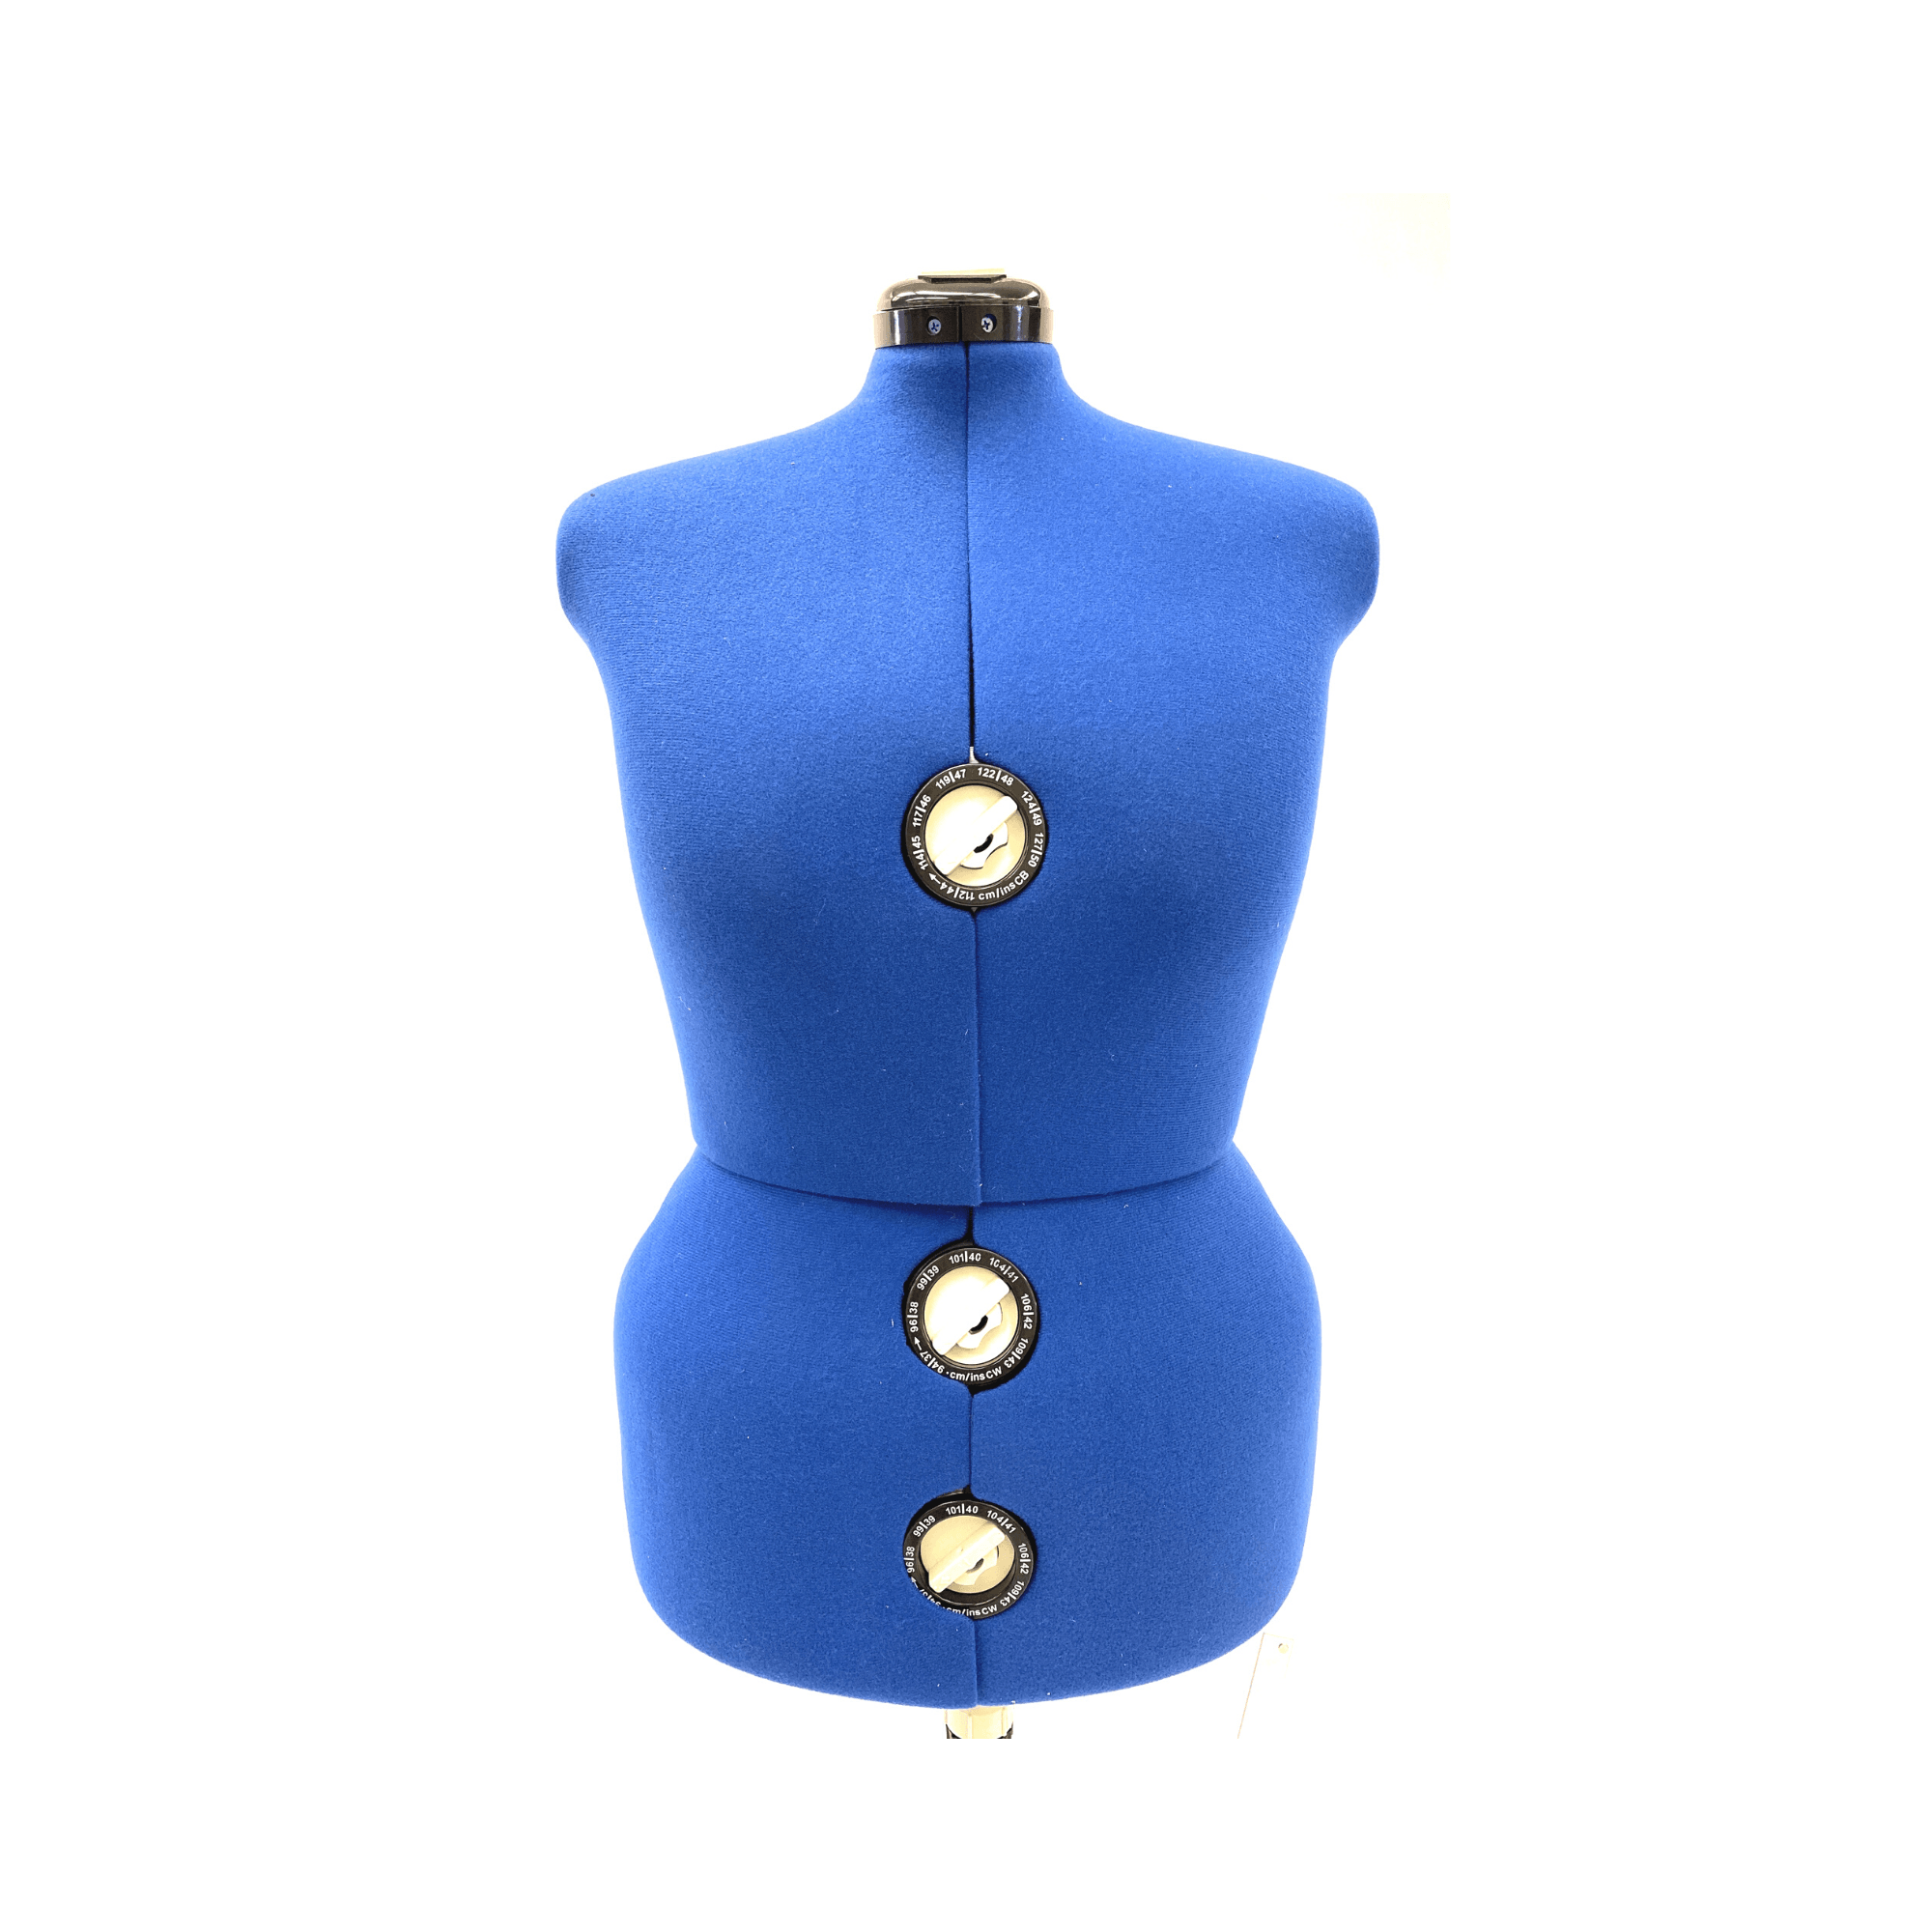 Adjustable Cloth Cover Sewing Female Mannequin Body for Tailor